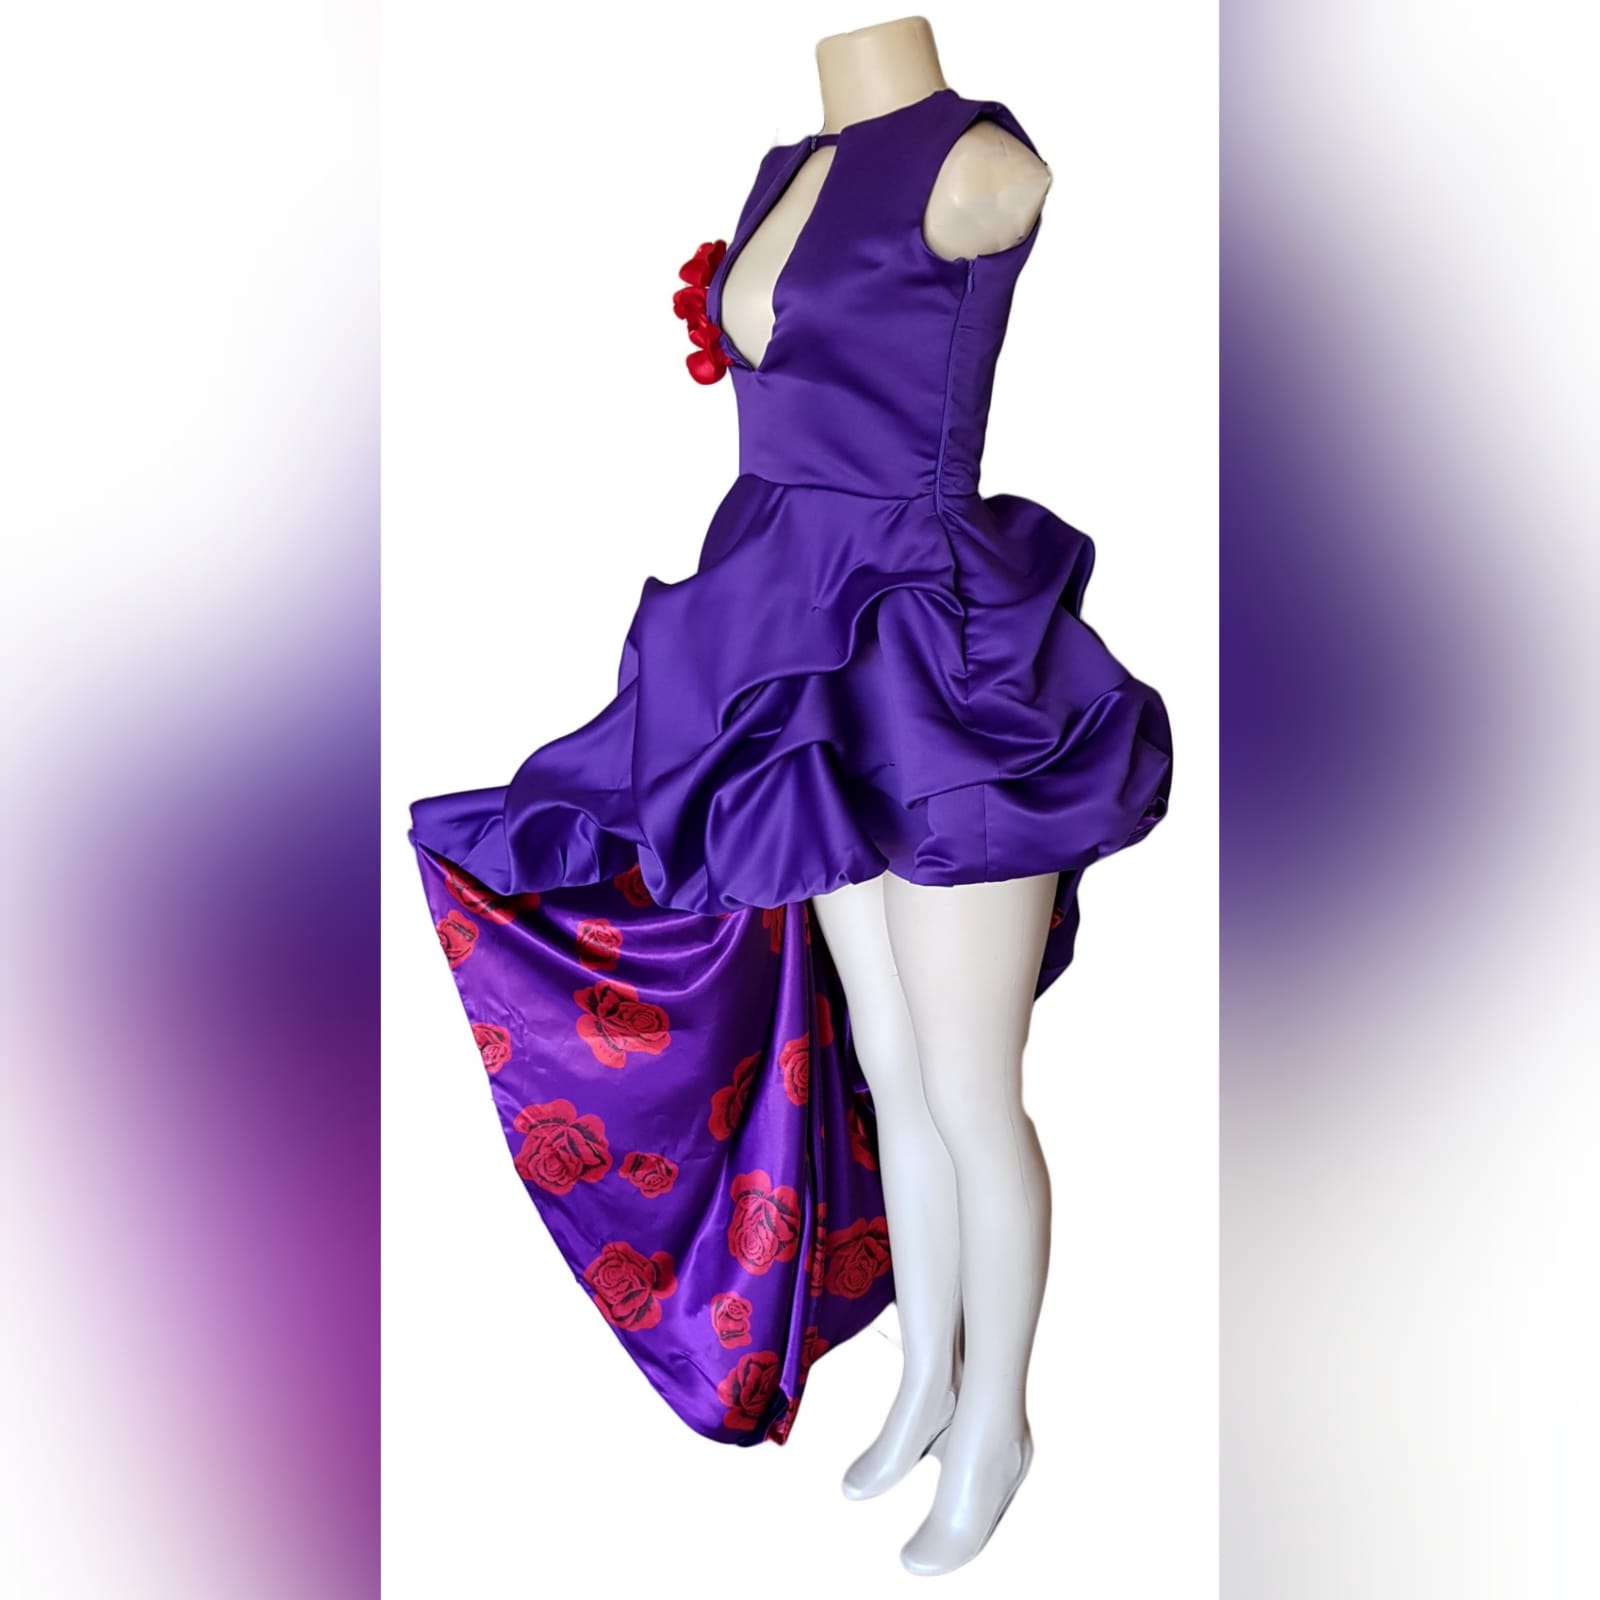 Purple and violet side high low prom dress 6 purple and violet side high low prom dress with a teardrop neckline and a diamond-shaped open back. With pull-ups lined with violet and red roses. Rose bust details.